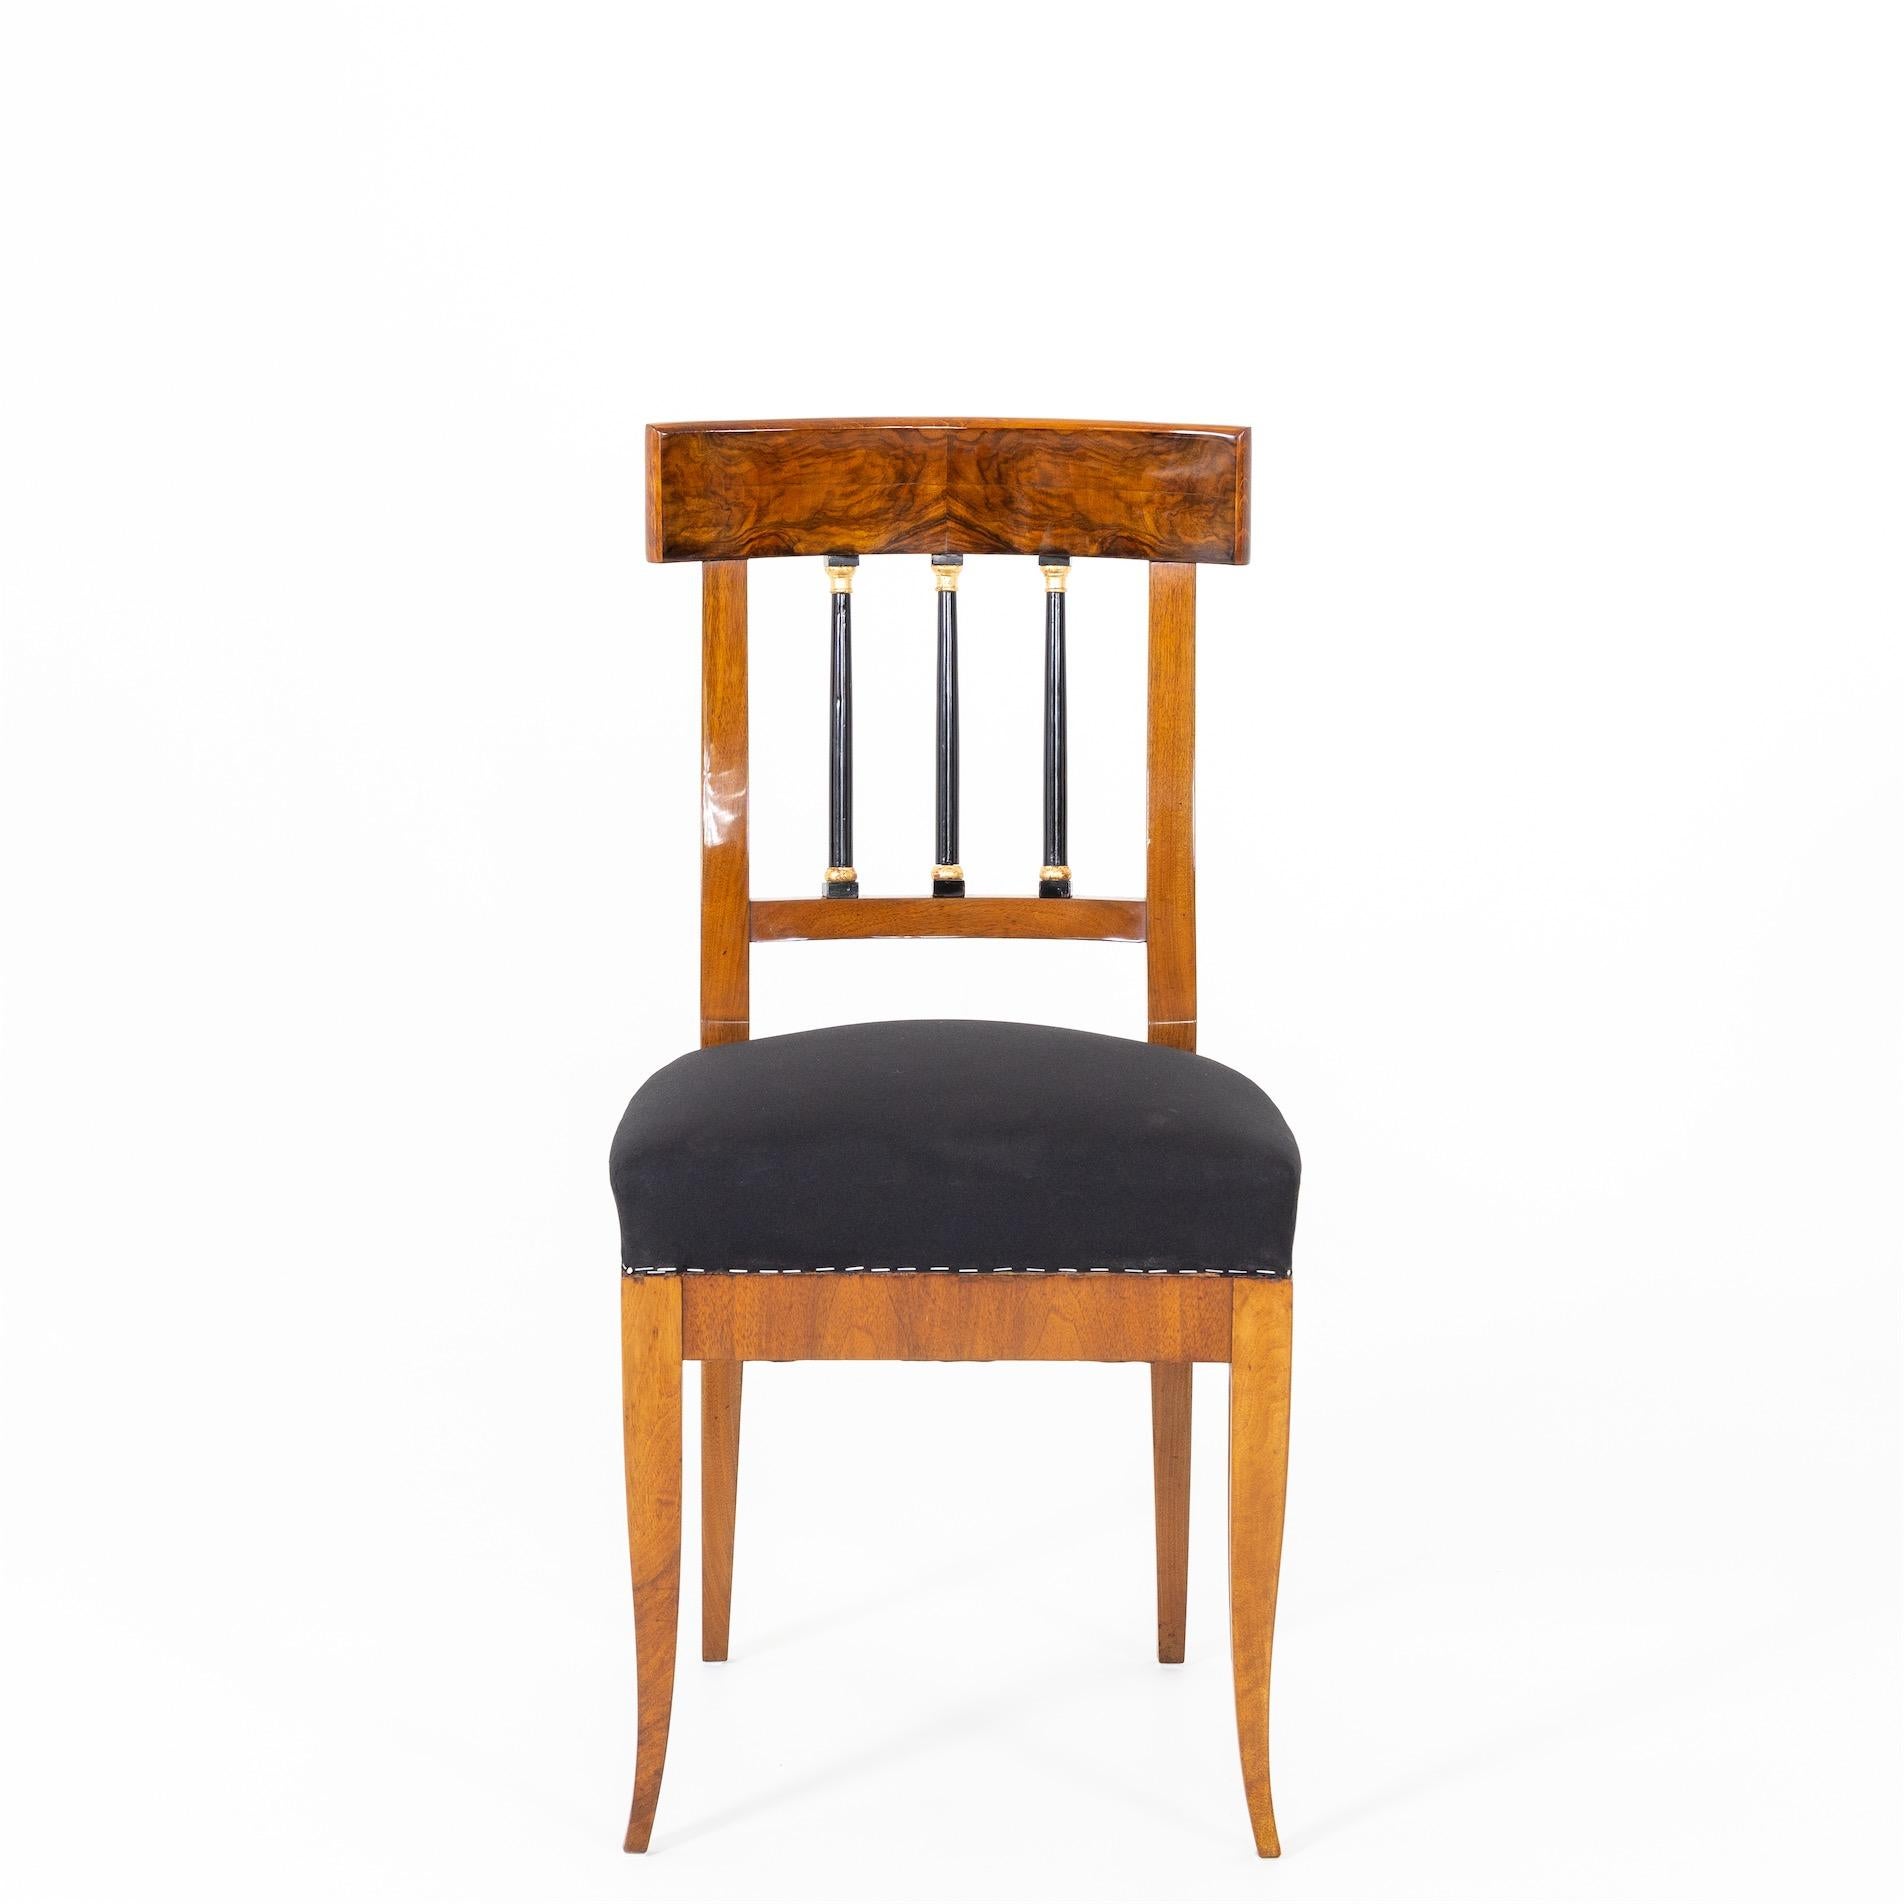 Biedermeier chair made of solid and veneered walnut. The chair stands on elegantly curved tapered legs and the back features ebonized solid columns with gold-patinated capitals. The chair is covered with a black base fabric.
 